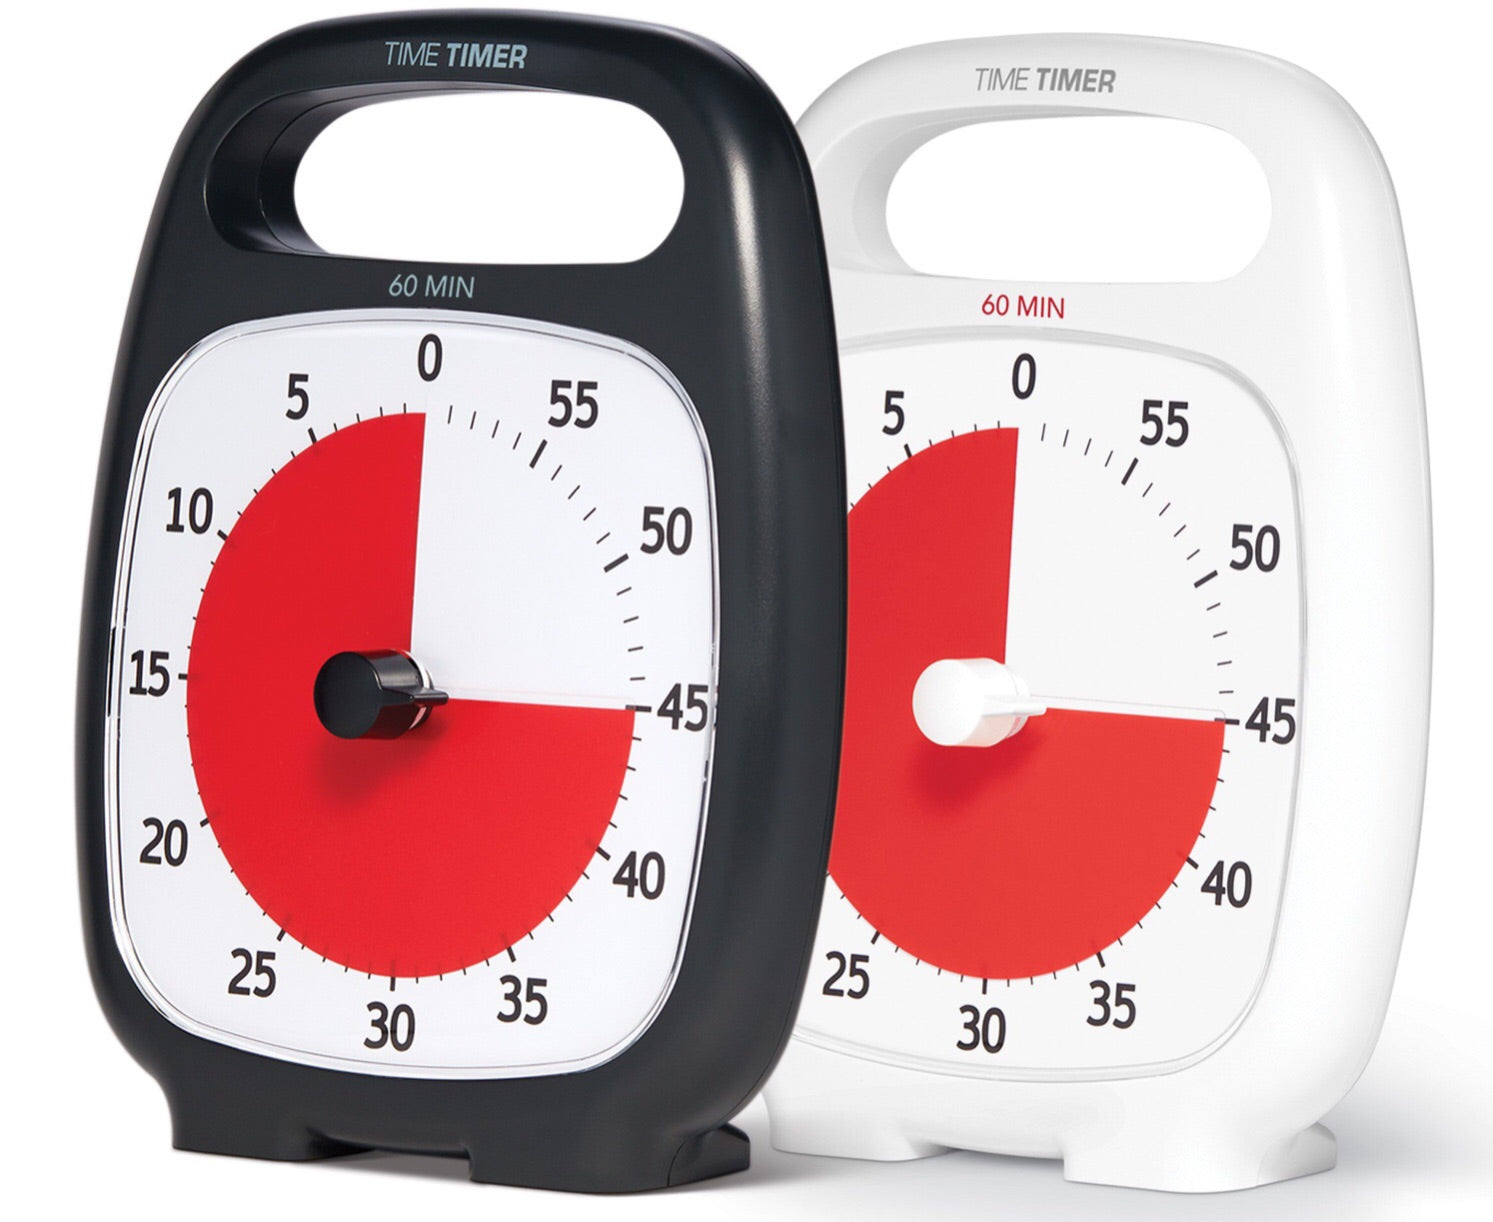 Time Timer PLUS®, 5 Minute Timer